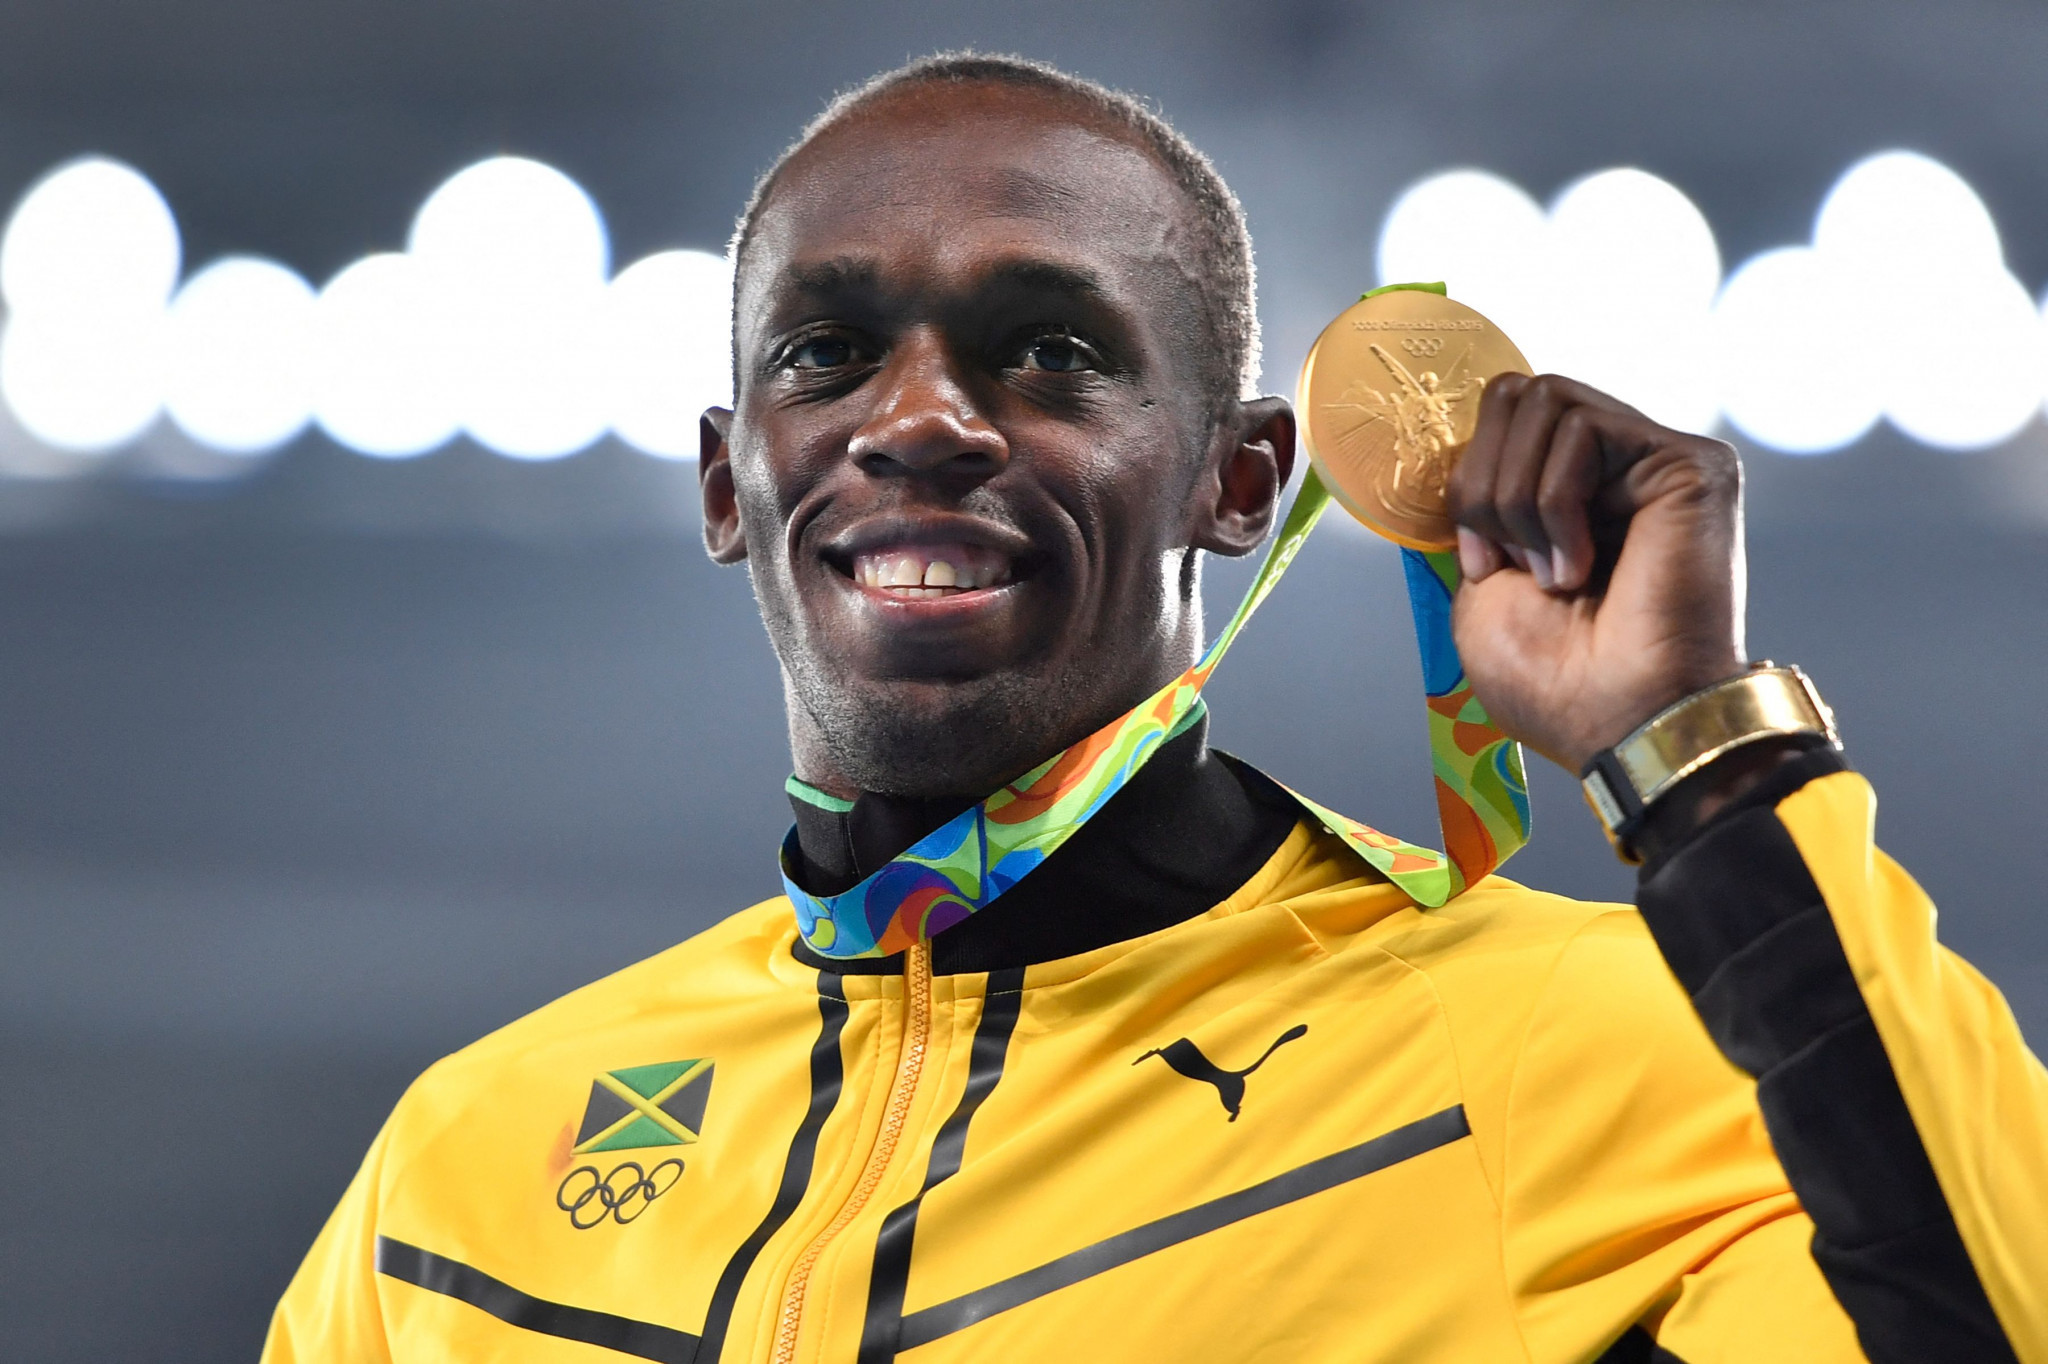 Millions of dollars reported missing from account of athletics great Bolt